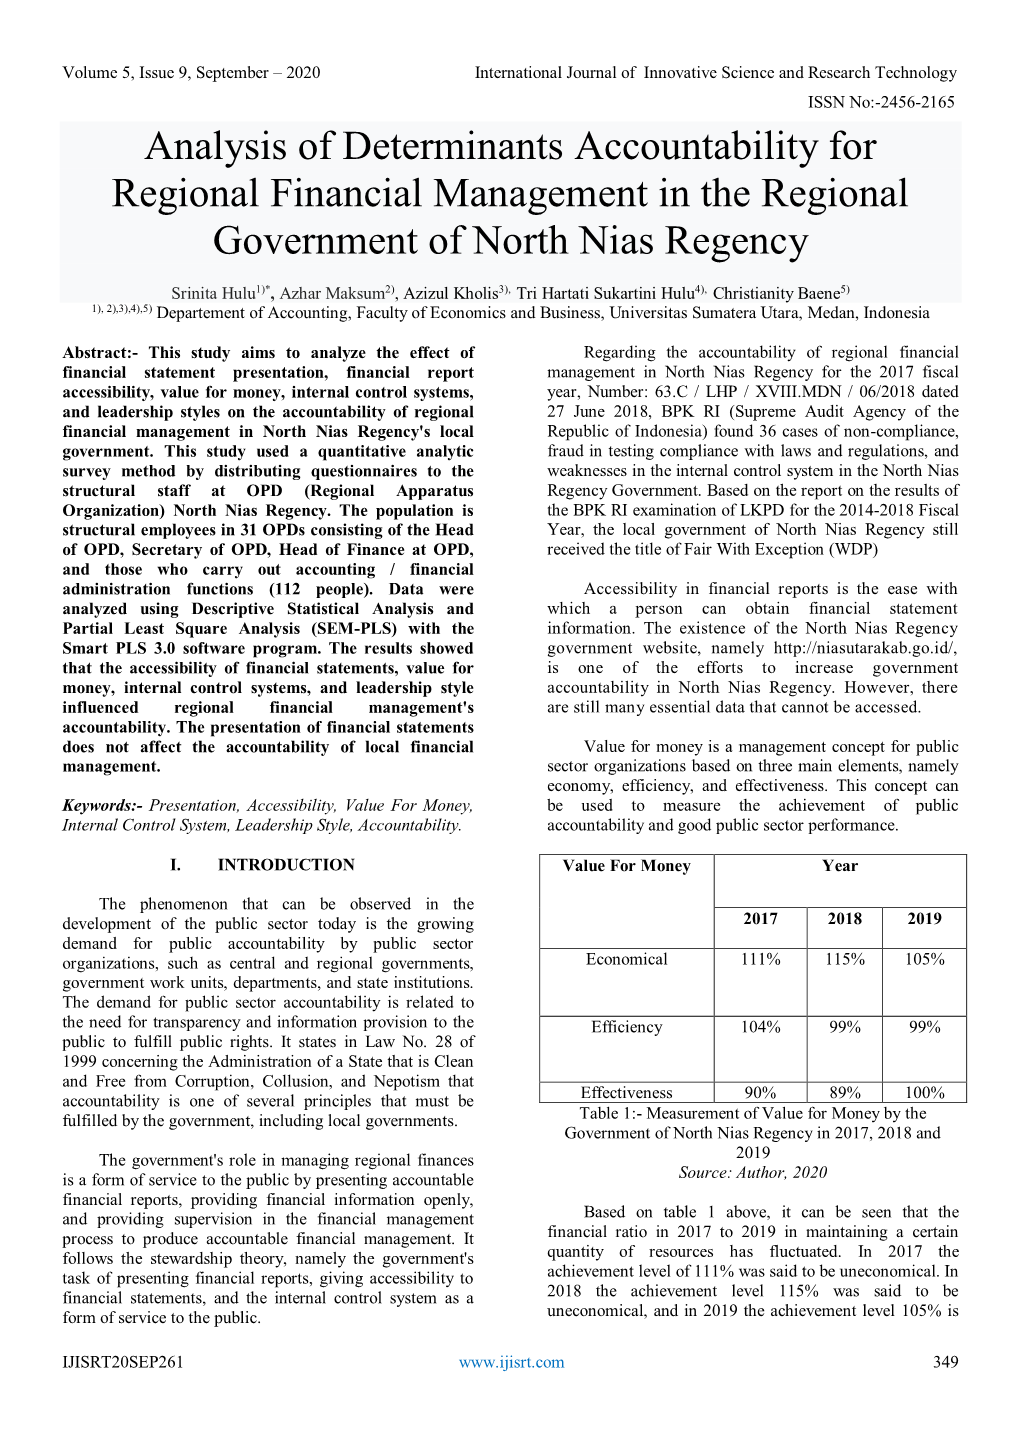 Analysis of Determinants Accountability for Regional Financial Management in the Regional Government of North Nias Regency